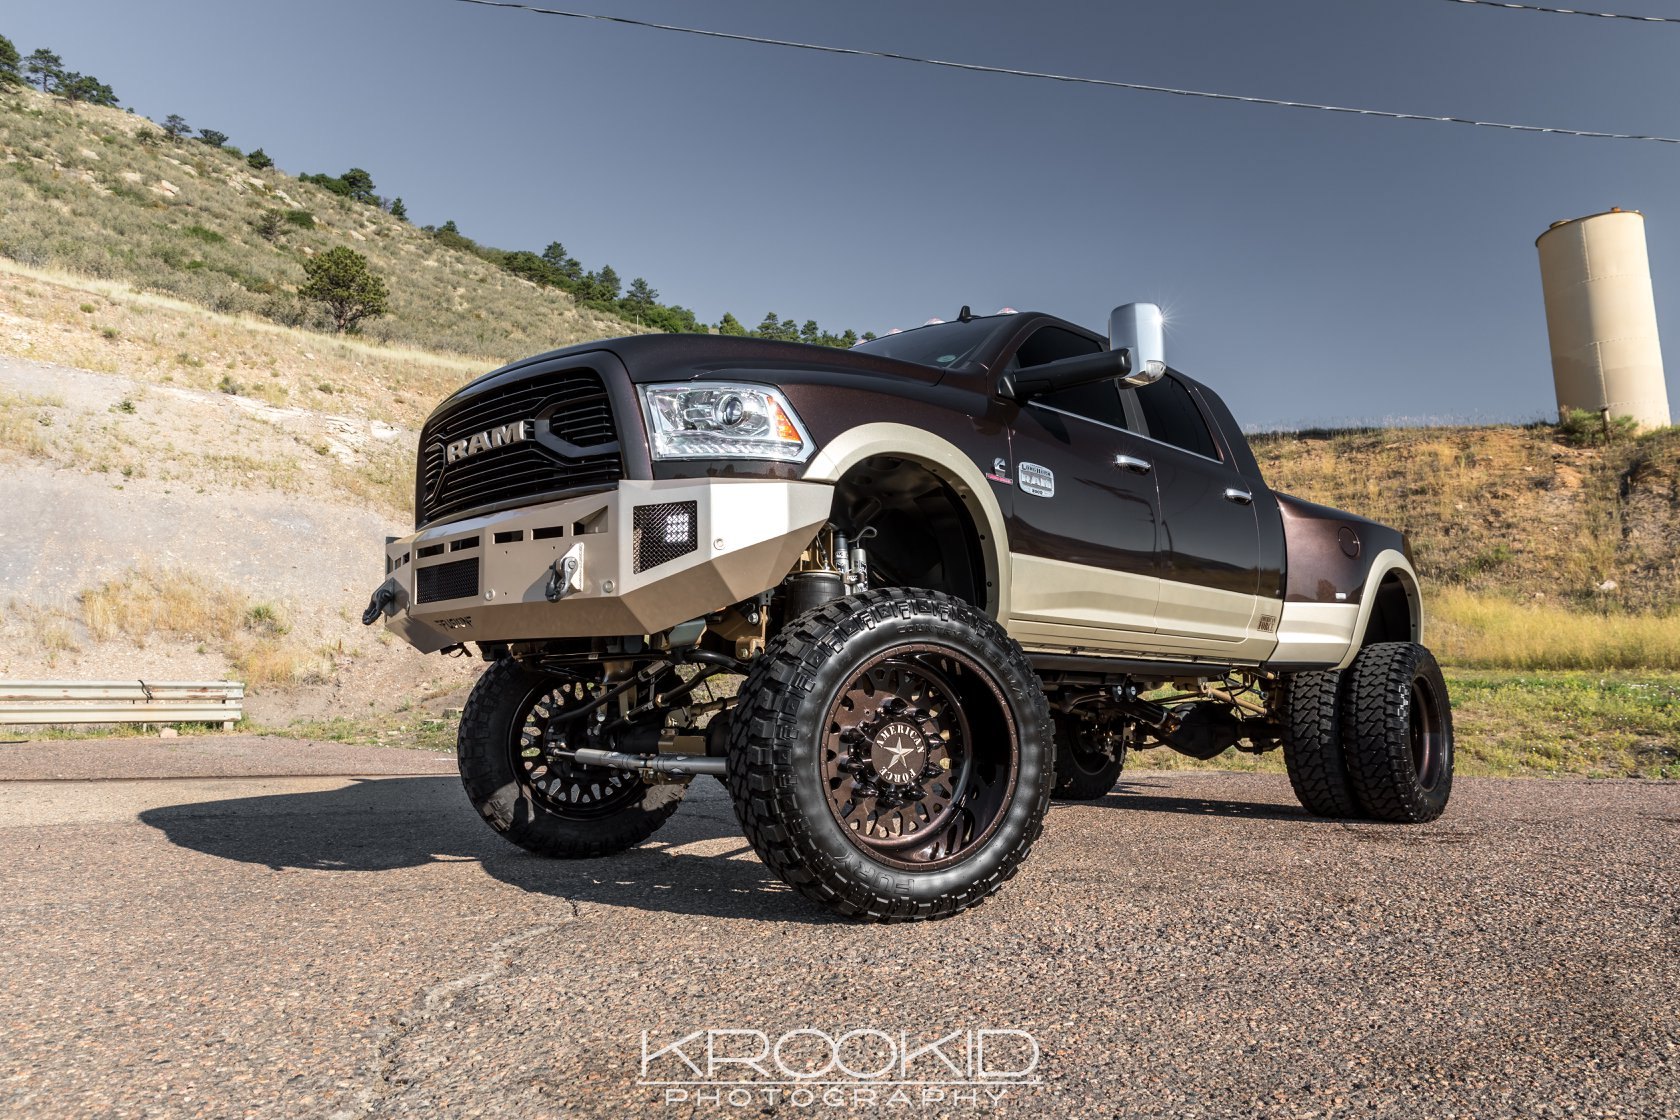 Brown Lifted Dodge Ram with Off Road Front Bumper - Photo by Krookid Photography